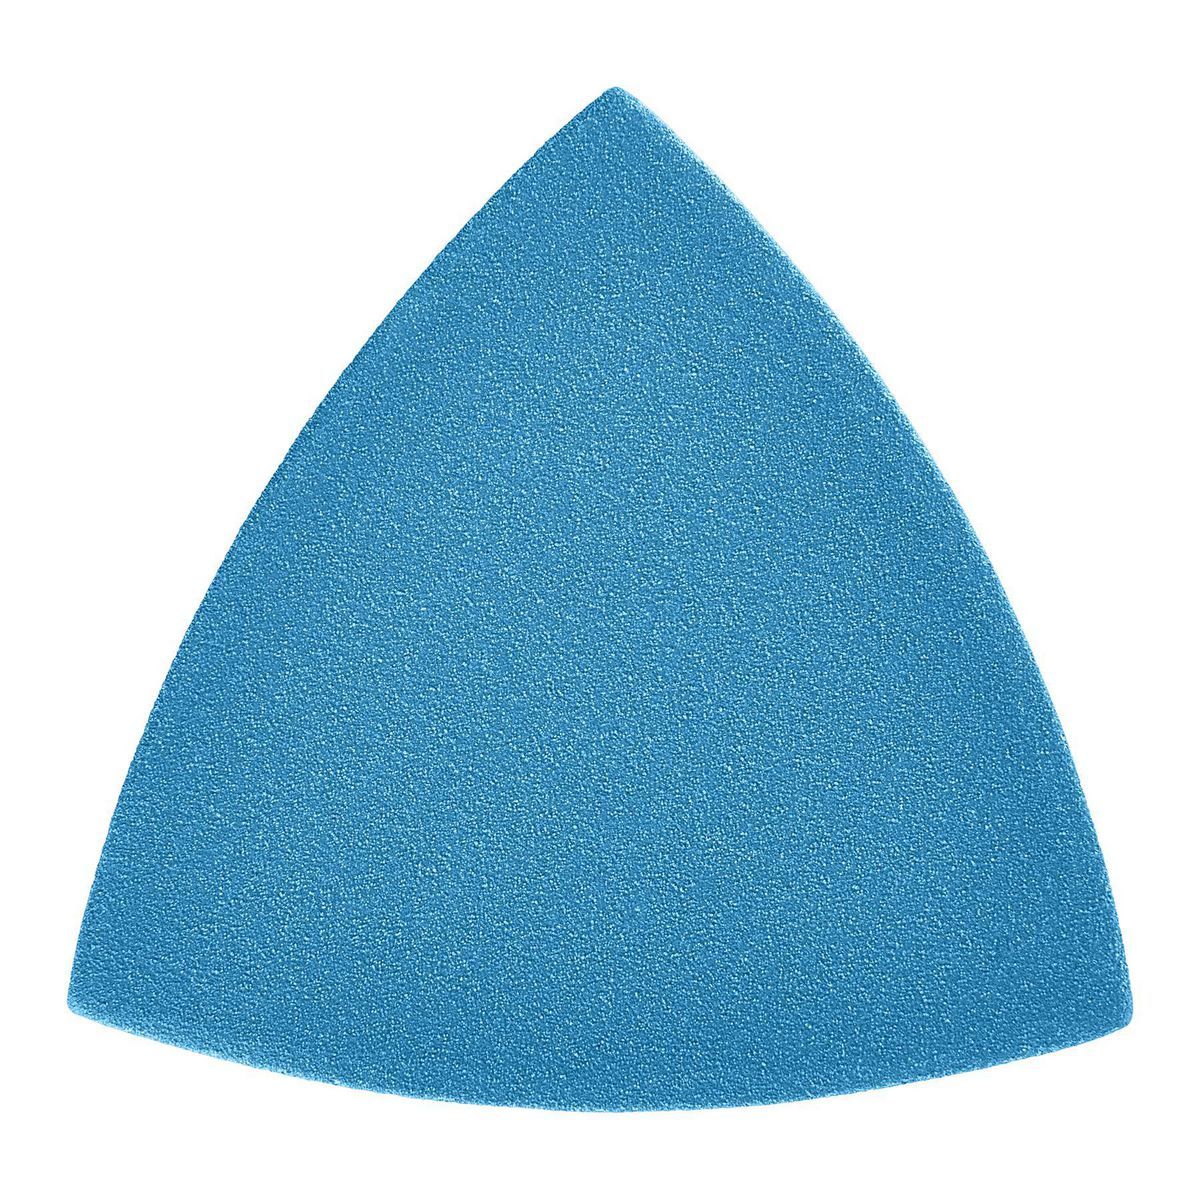 220 Grit Hook and Loop Triangle Detail Sanding Sheets for Oscillating Multi-Tools, 5-Pack